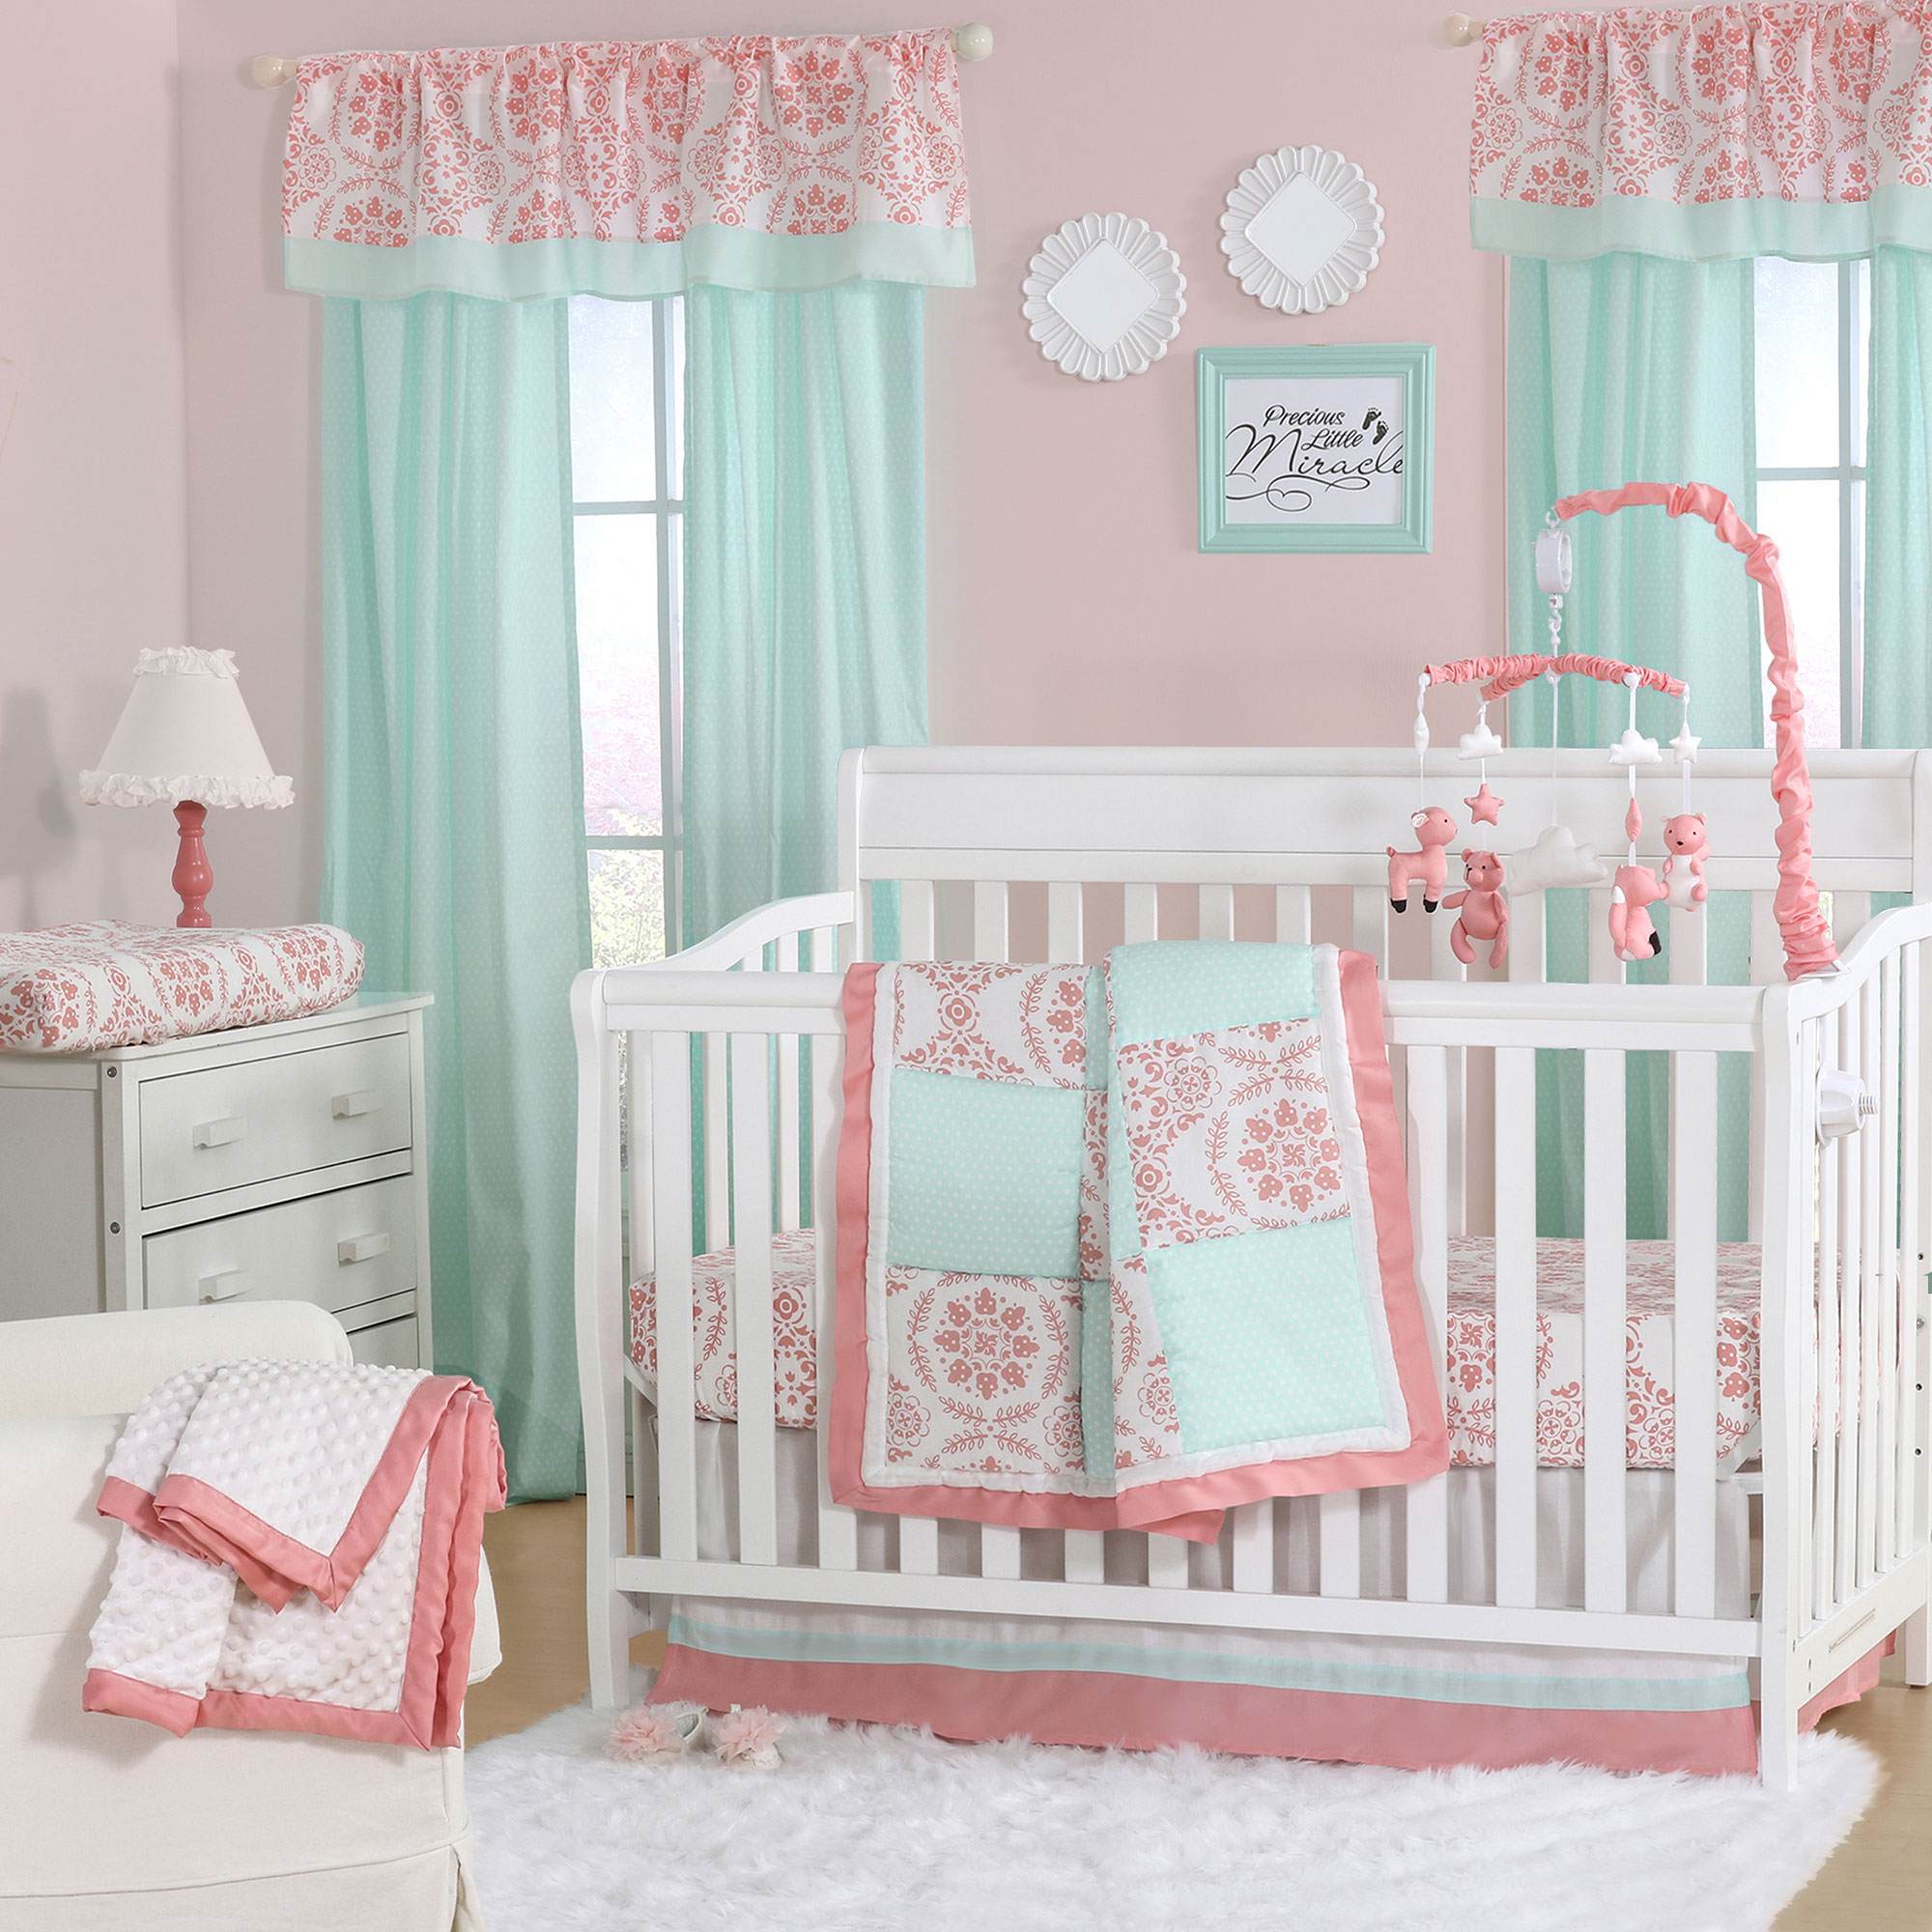 Details about Mint Green and Coral Patchwork 3 Piece Baby Crib Bedding Set  by The Peanut Shell